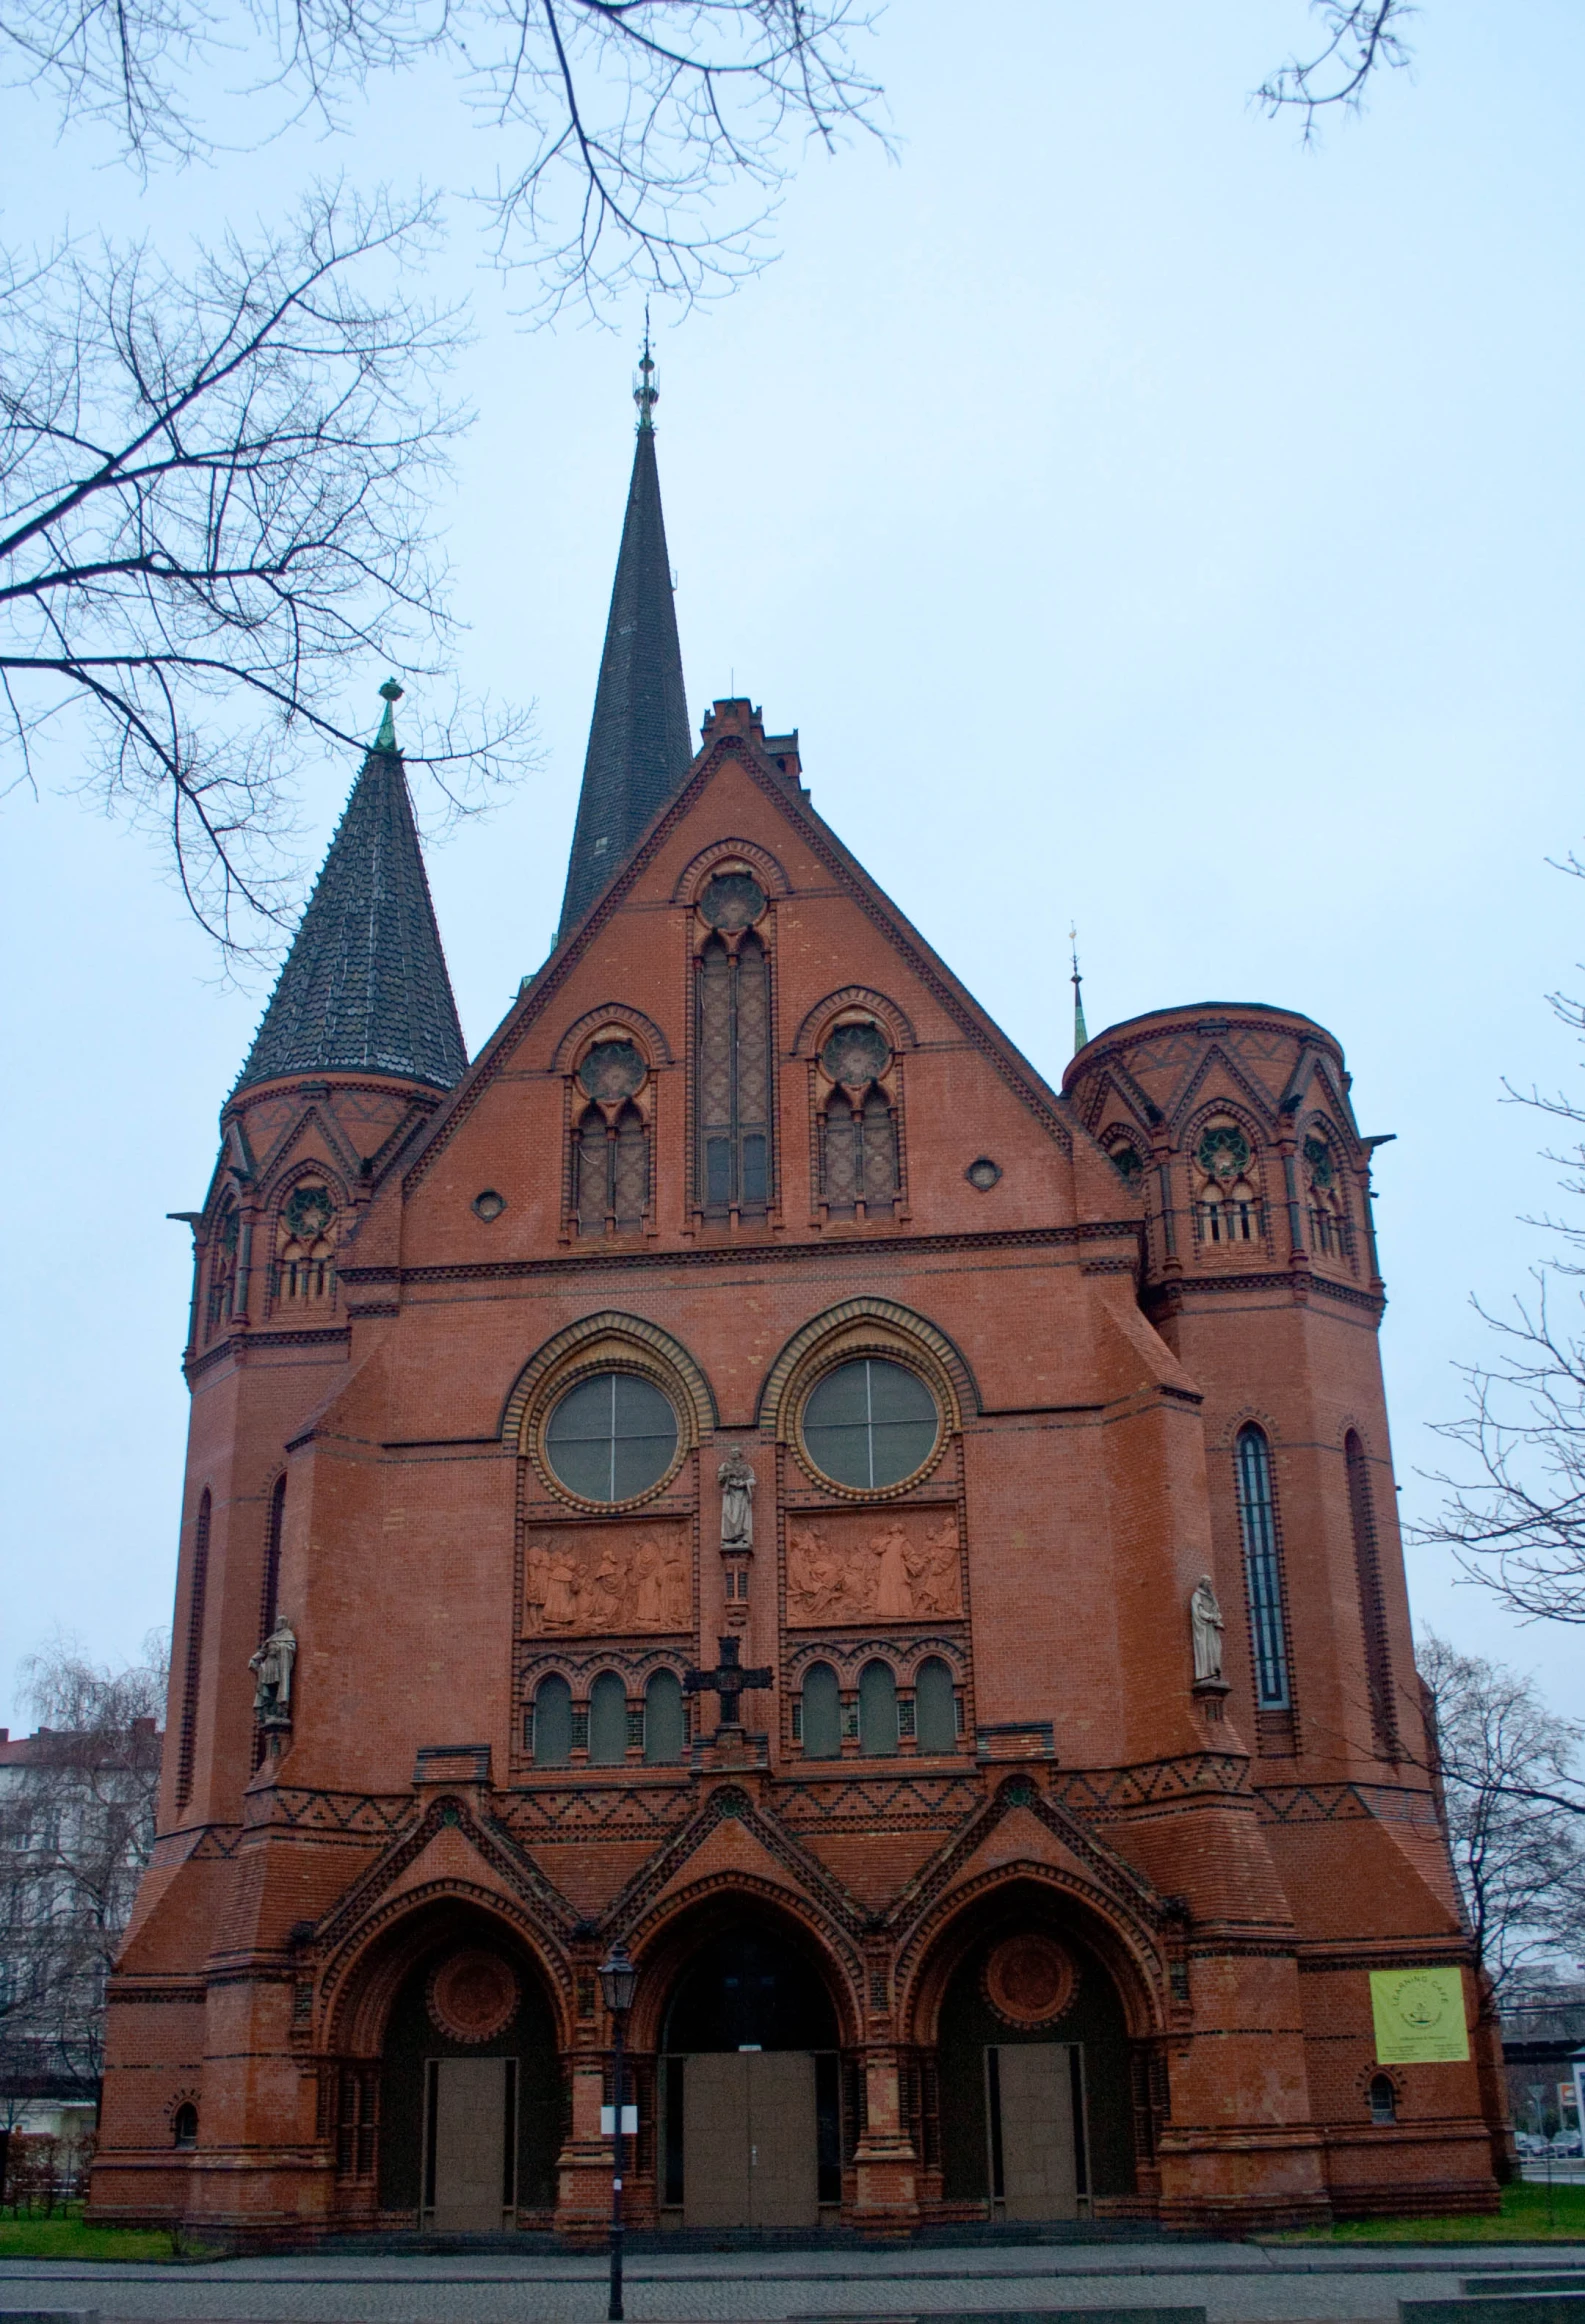 this is an old church built in gothic style